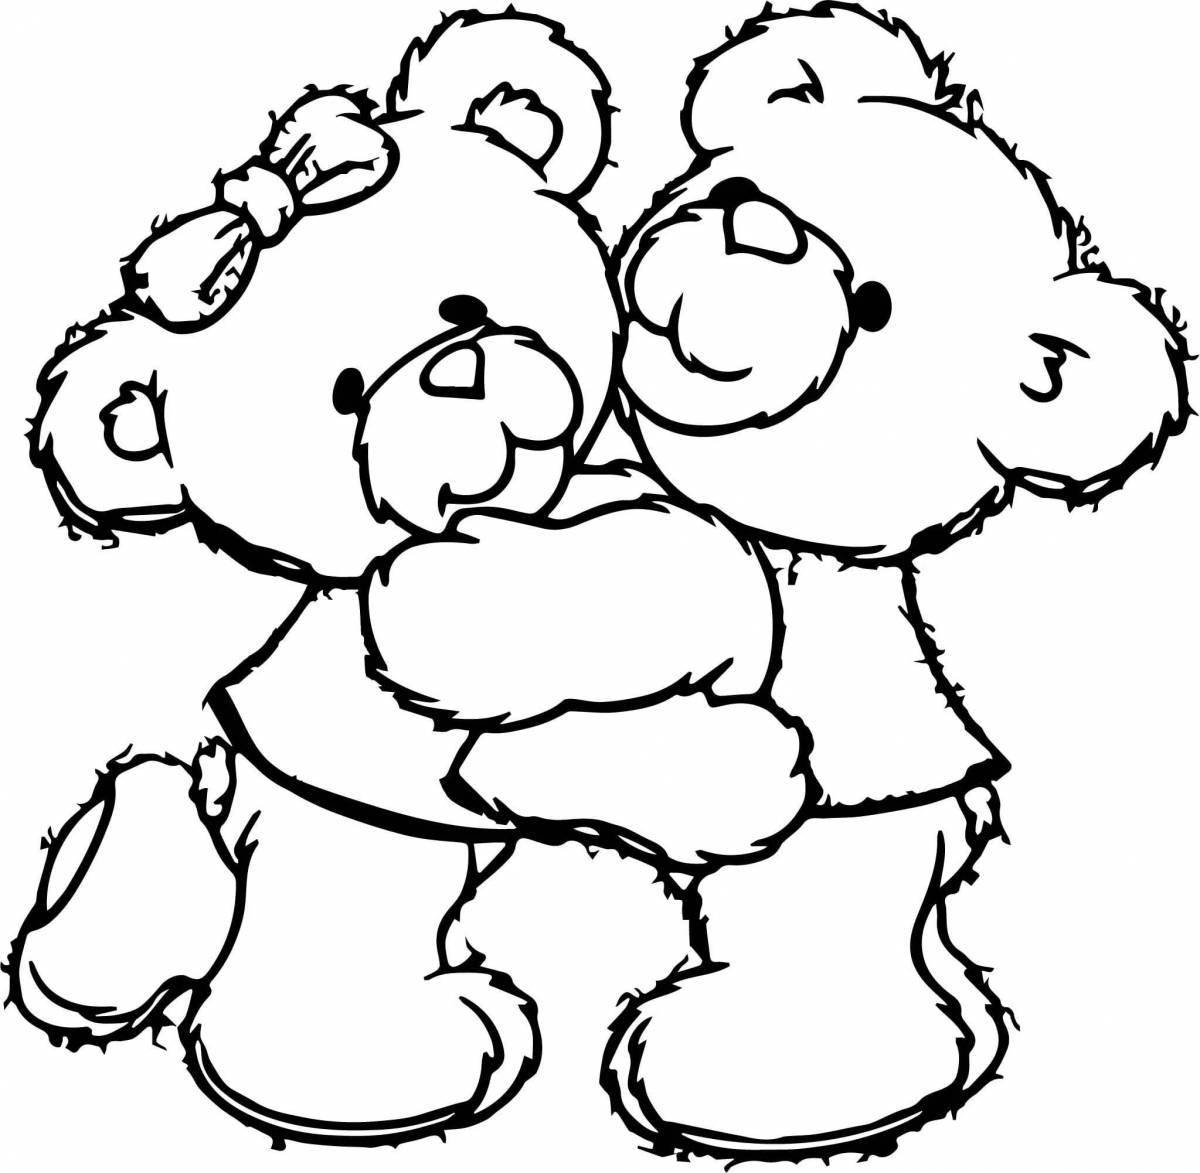 Brave bear coloring pages